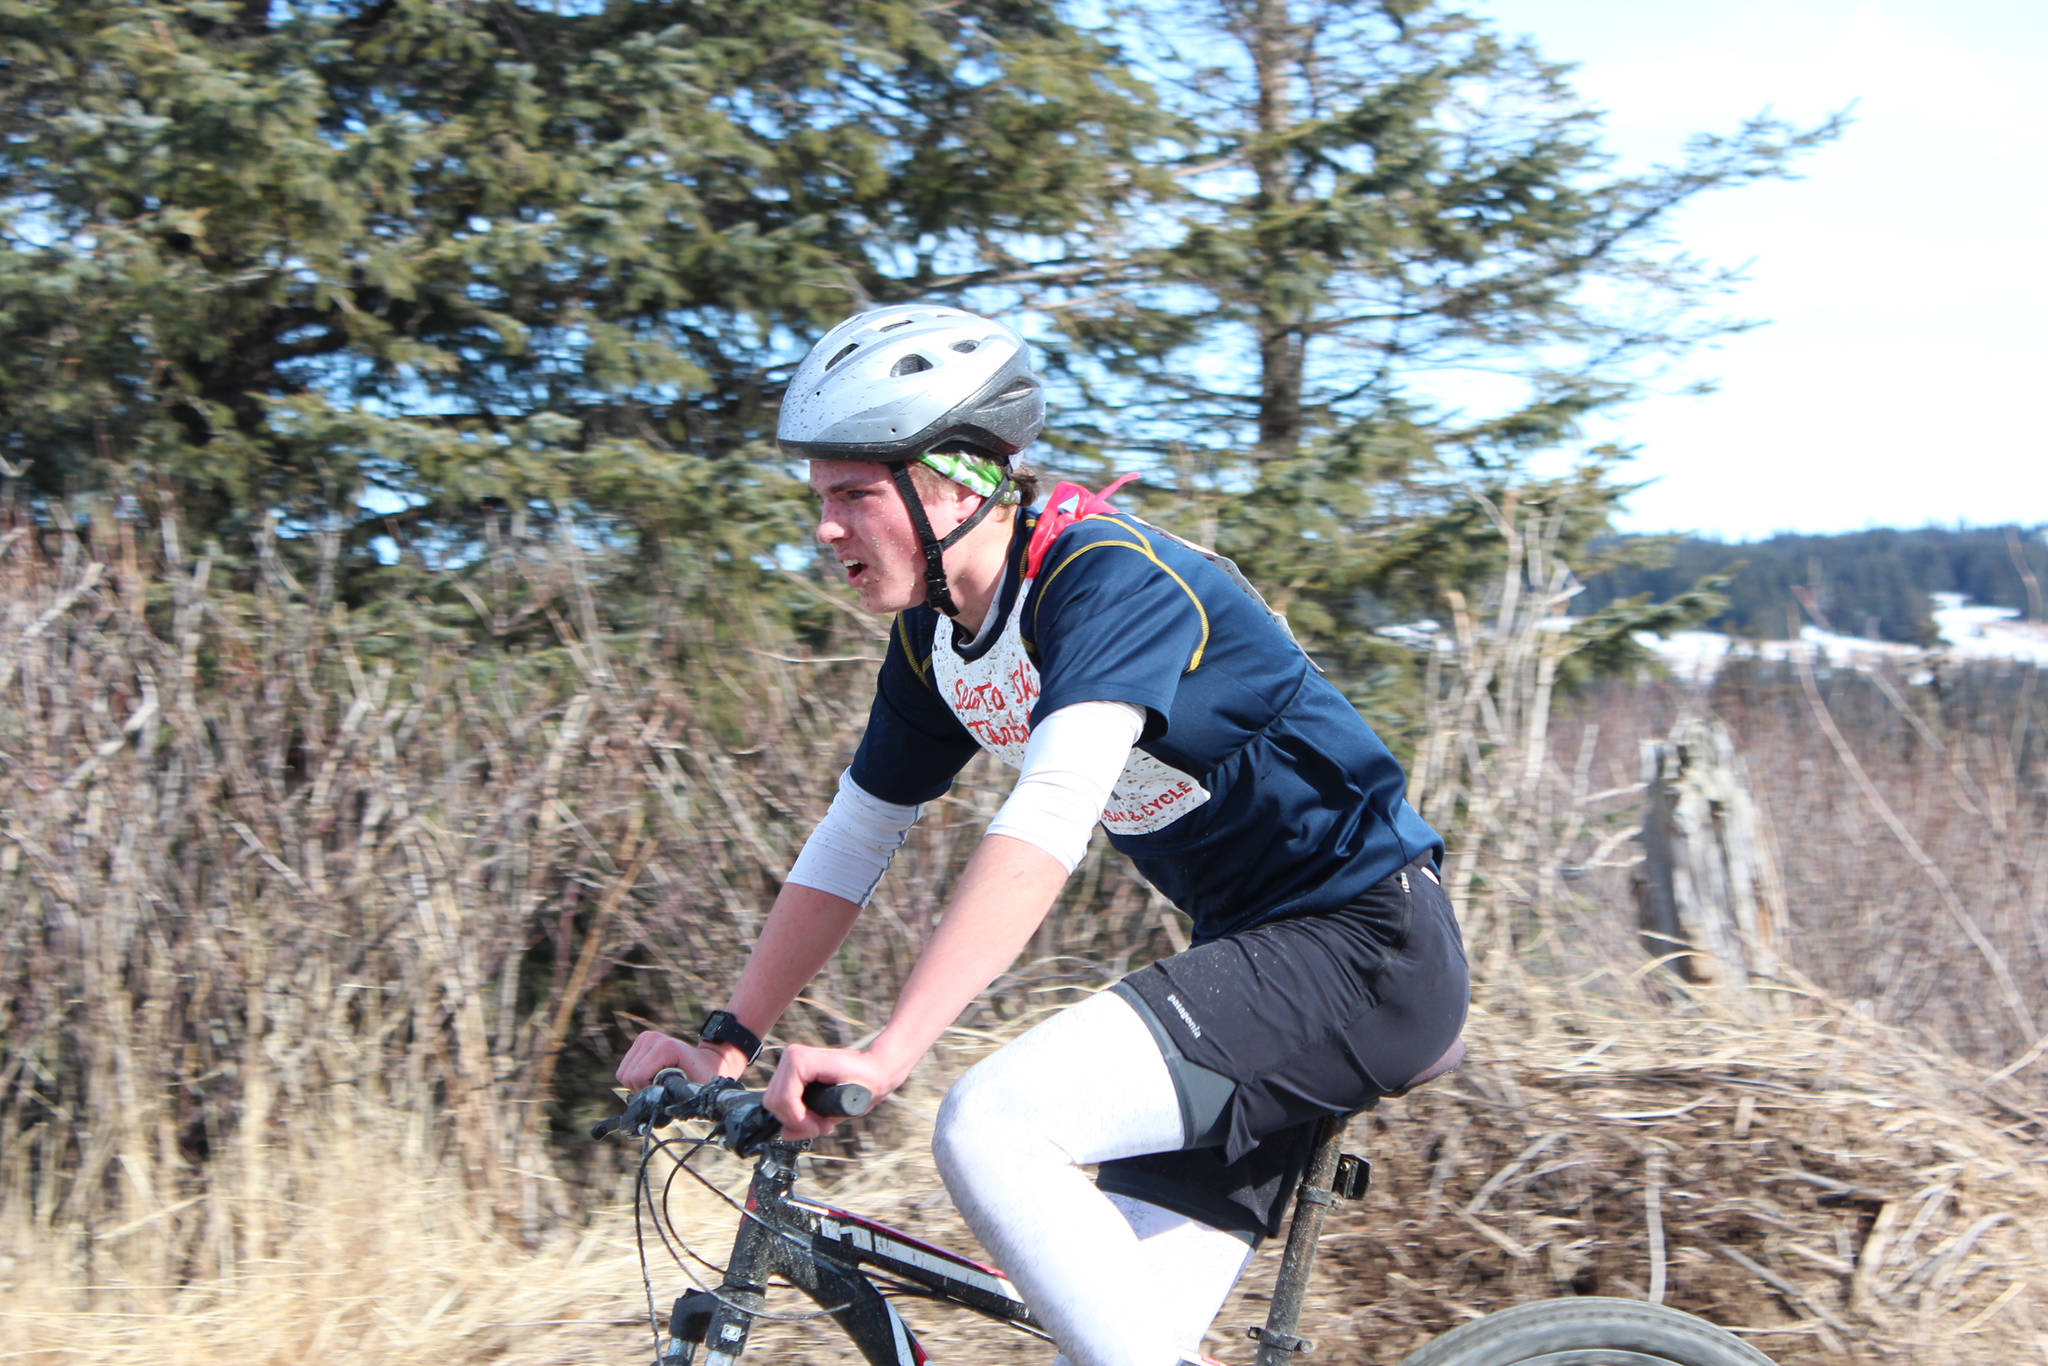 Homer High School senior Denver Waclawski bikes into the second transition station of this year’s Sea to Ski Triathlon. He finished first in all three legs of the race and took first place overall Sunday, March 25, 2018 in Homer, Alaska. (Photo by Megan Pacer/Homer News)